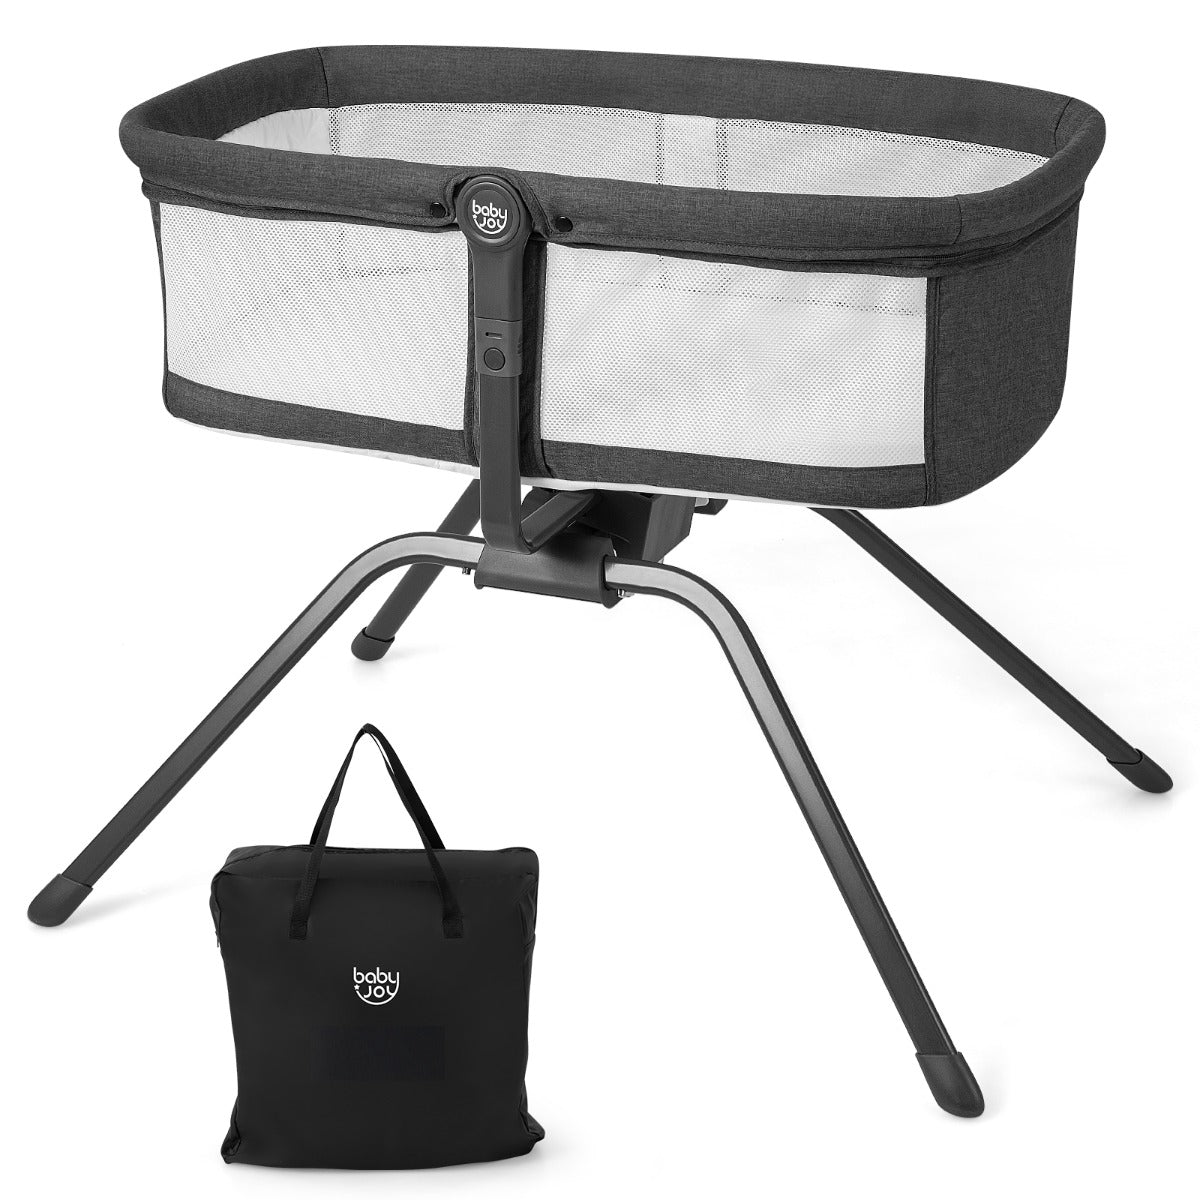 Portable Baby Crib with Mattress - Foldable Design and Carry Bag